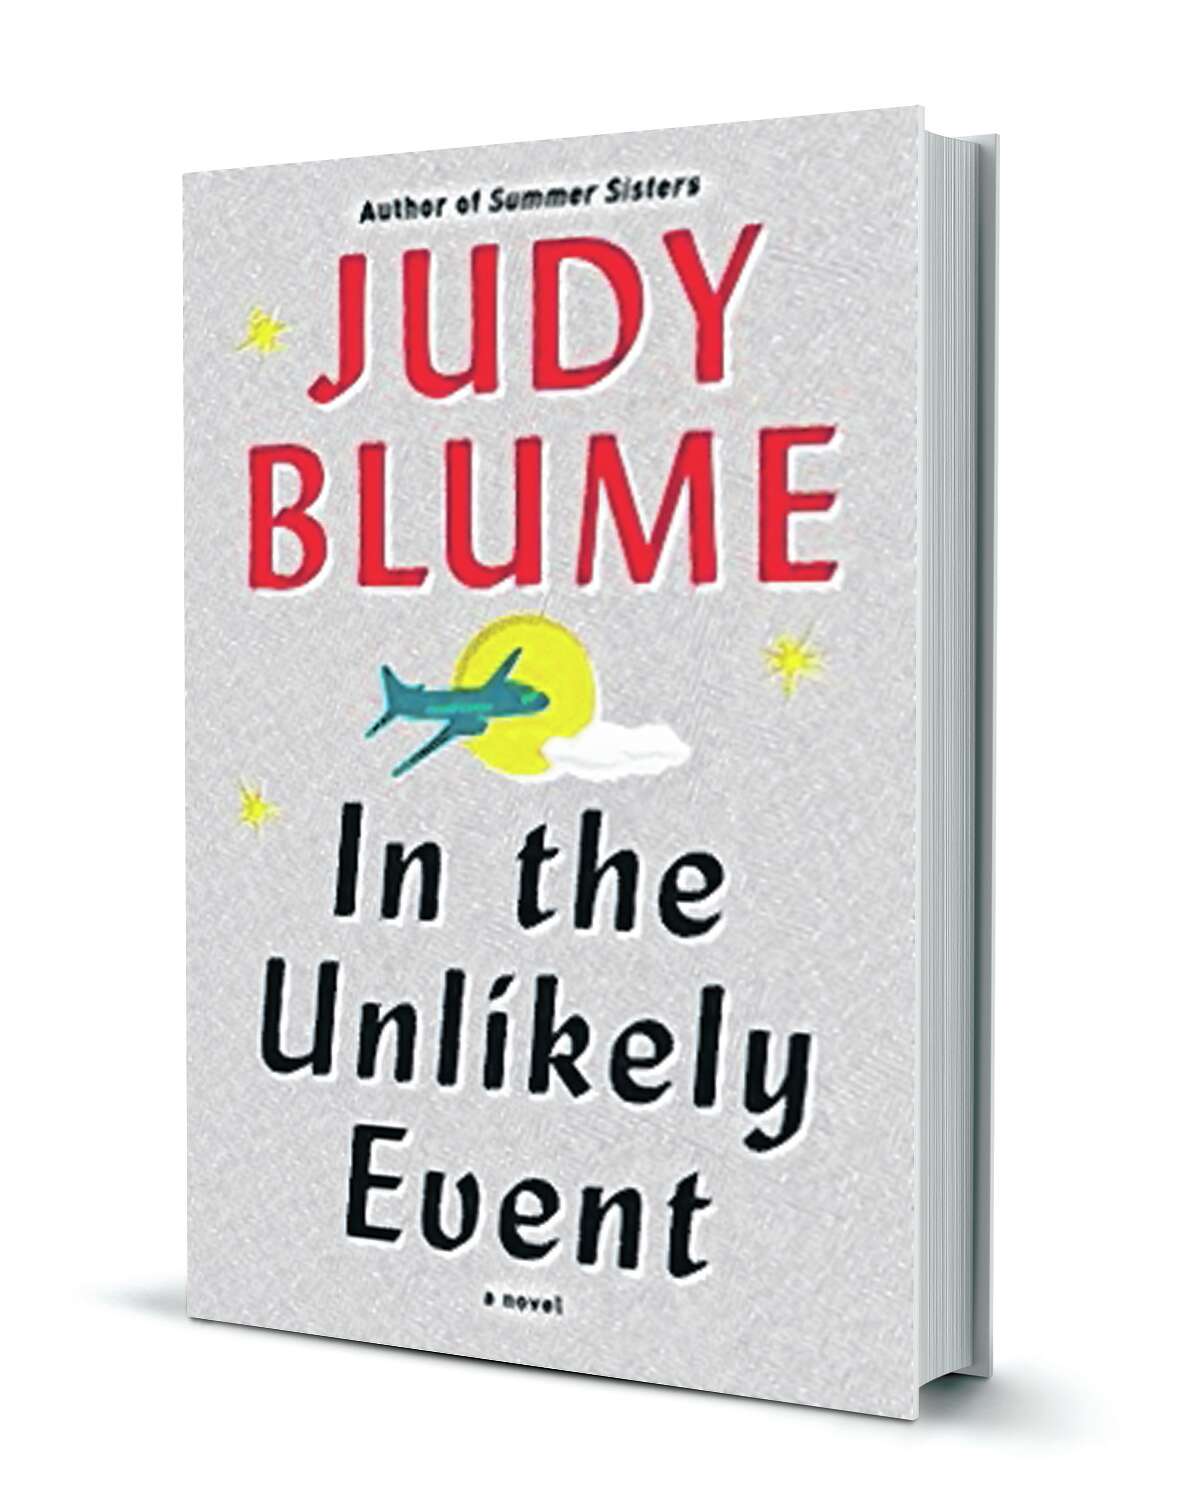 In this novel for adults by the queen of YA fiction, a 15-year-old girl named Miri lives through a terrifying three-month period during which three passenger planes crash in her hometown of Elizabeth, N.J., each time narrowly avoiding some sort of school or orphanage. Read the story: Judy Blume's grown-up novel